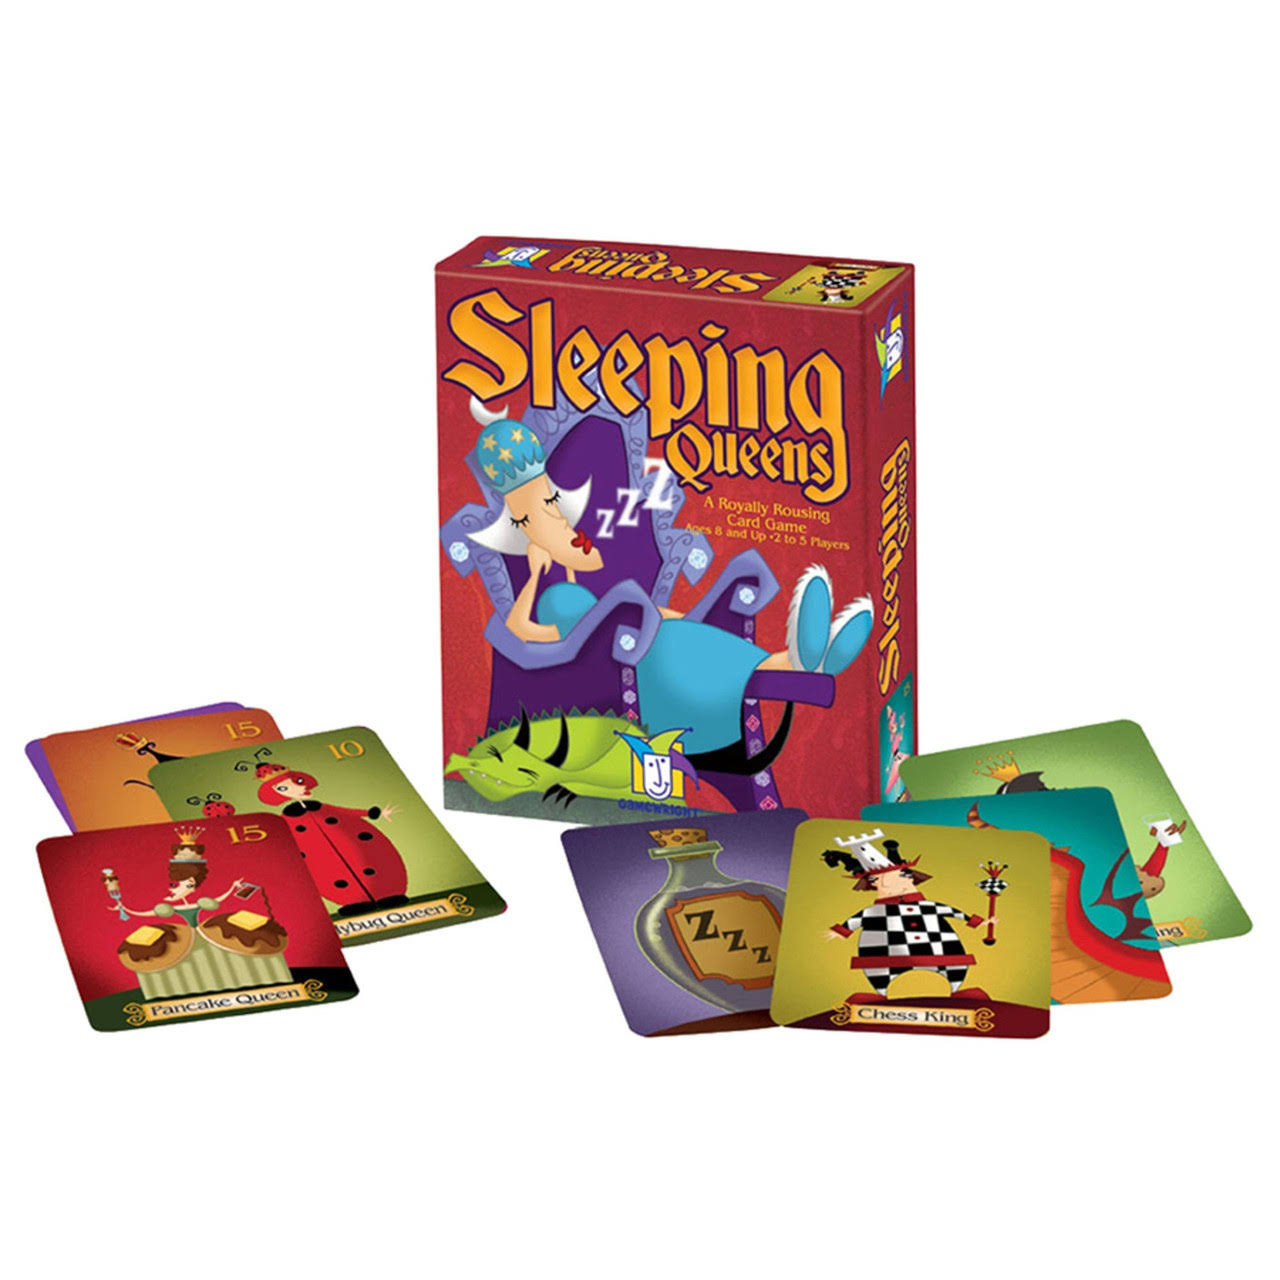 Sleeping Queens A Royally Rousing Card Game